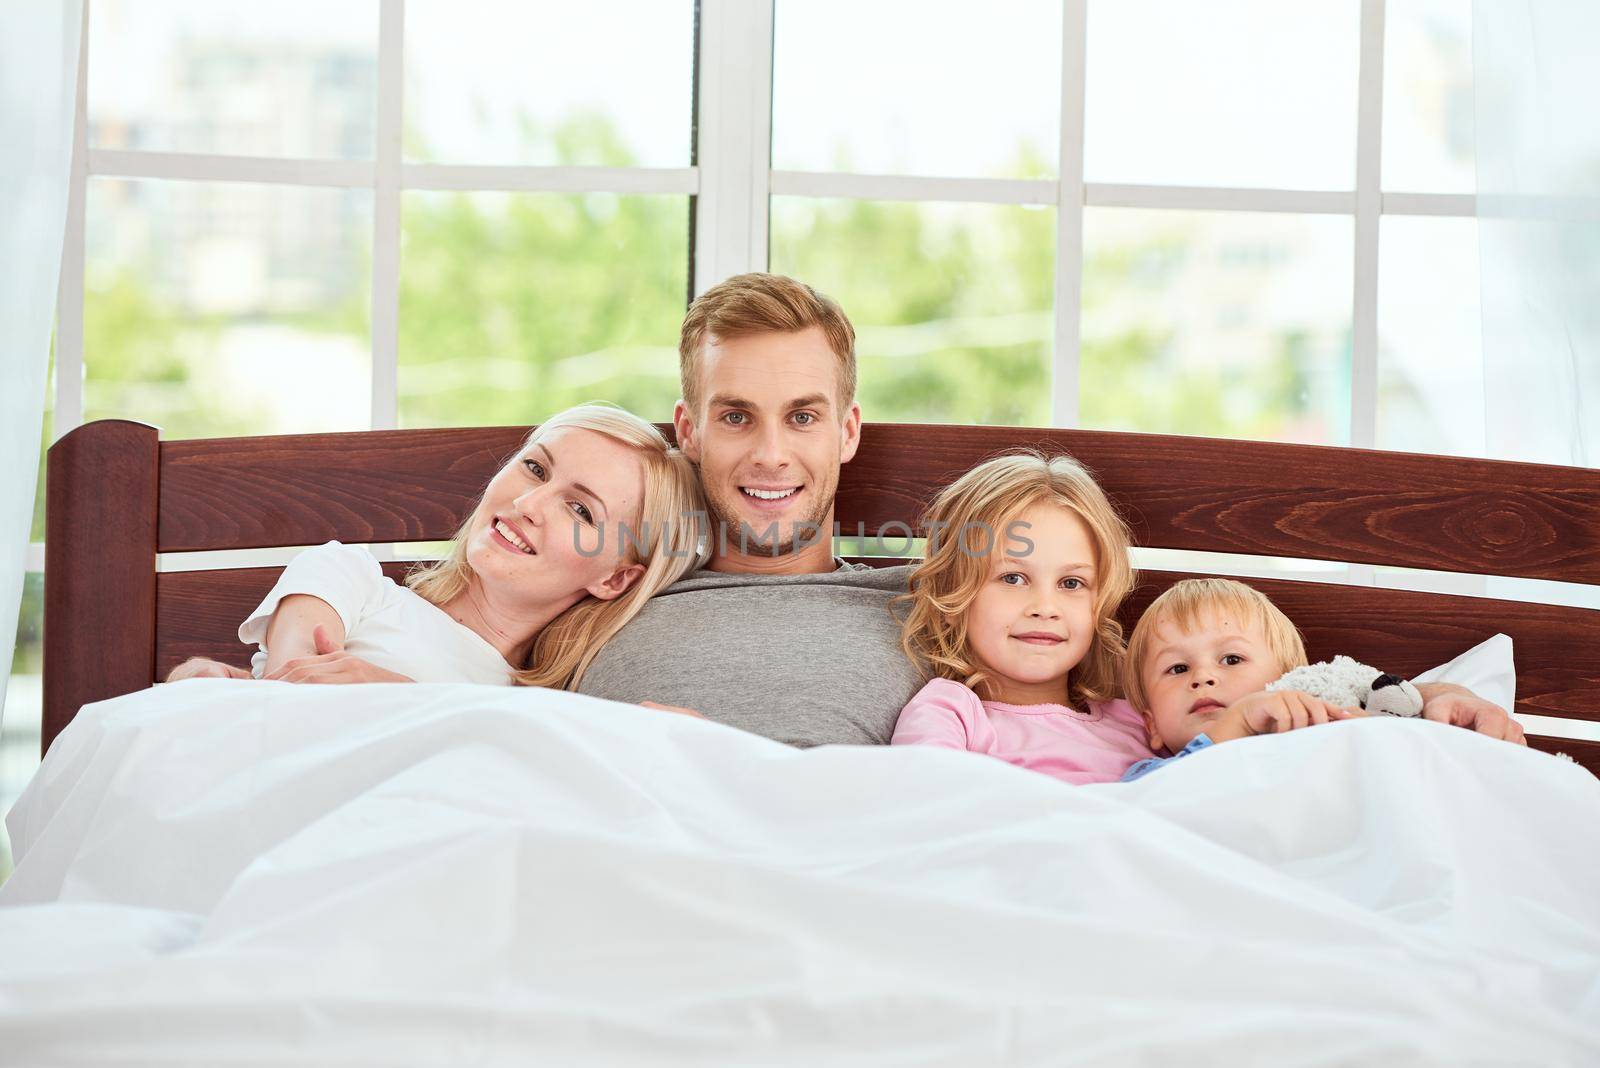 Family day. Young beautiful family of four people relaxing in bed together and looking at camera with smile. Enjoying weekend at home by friendsstock